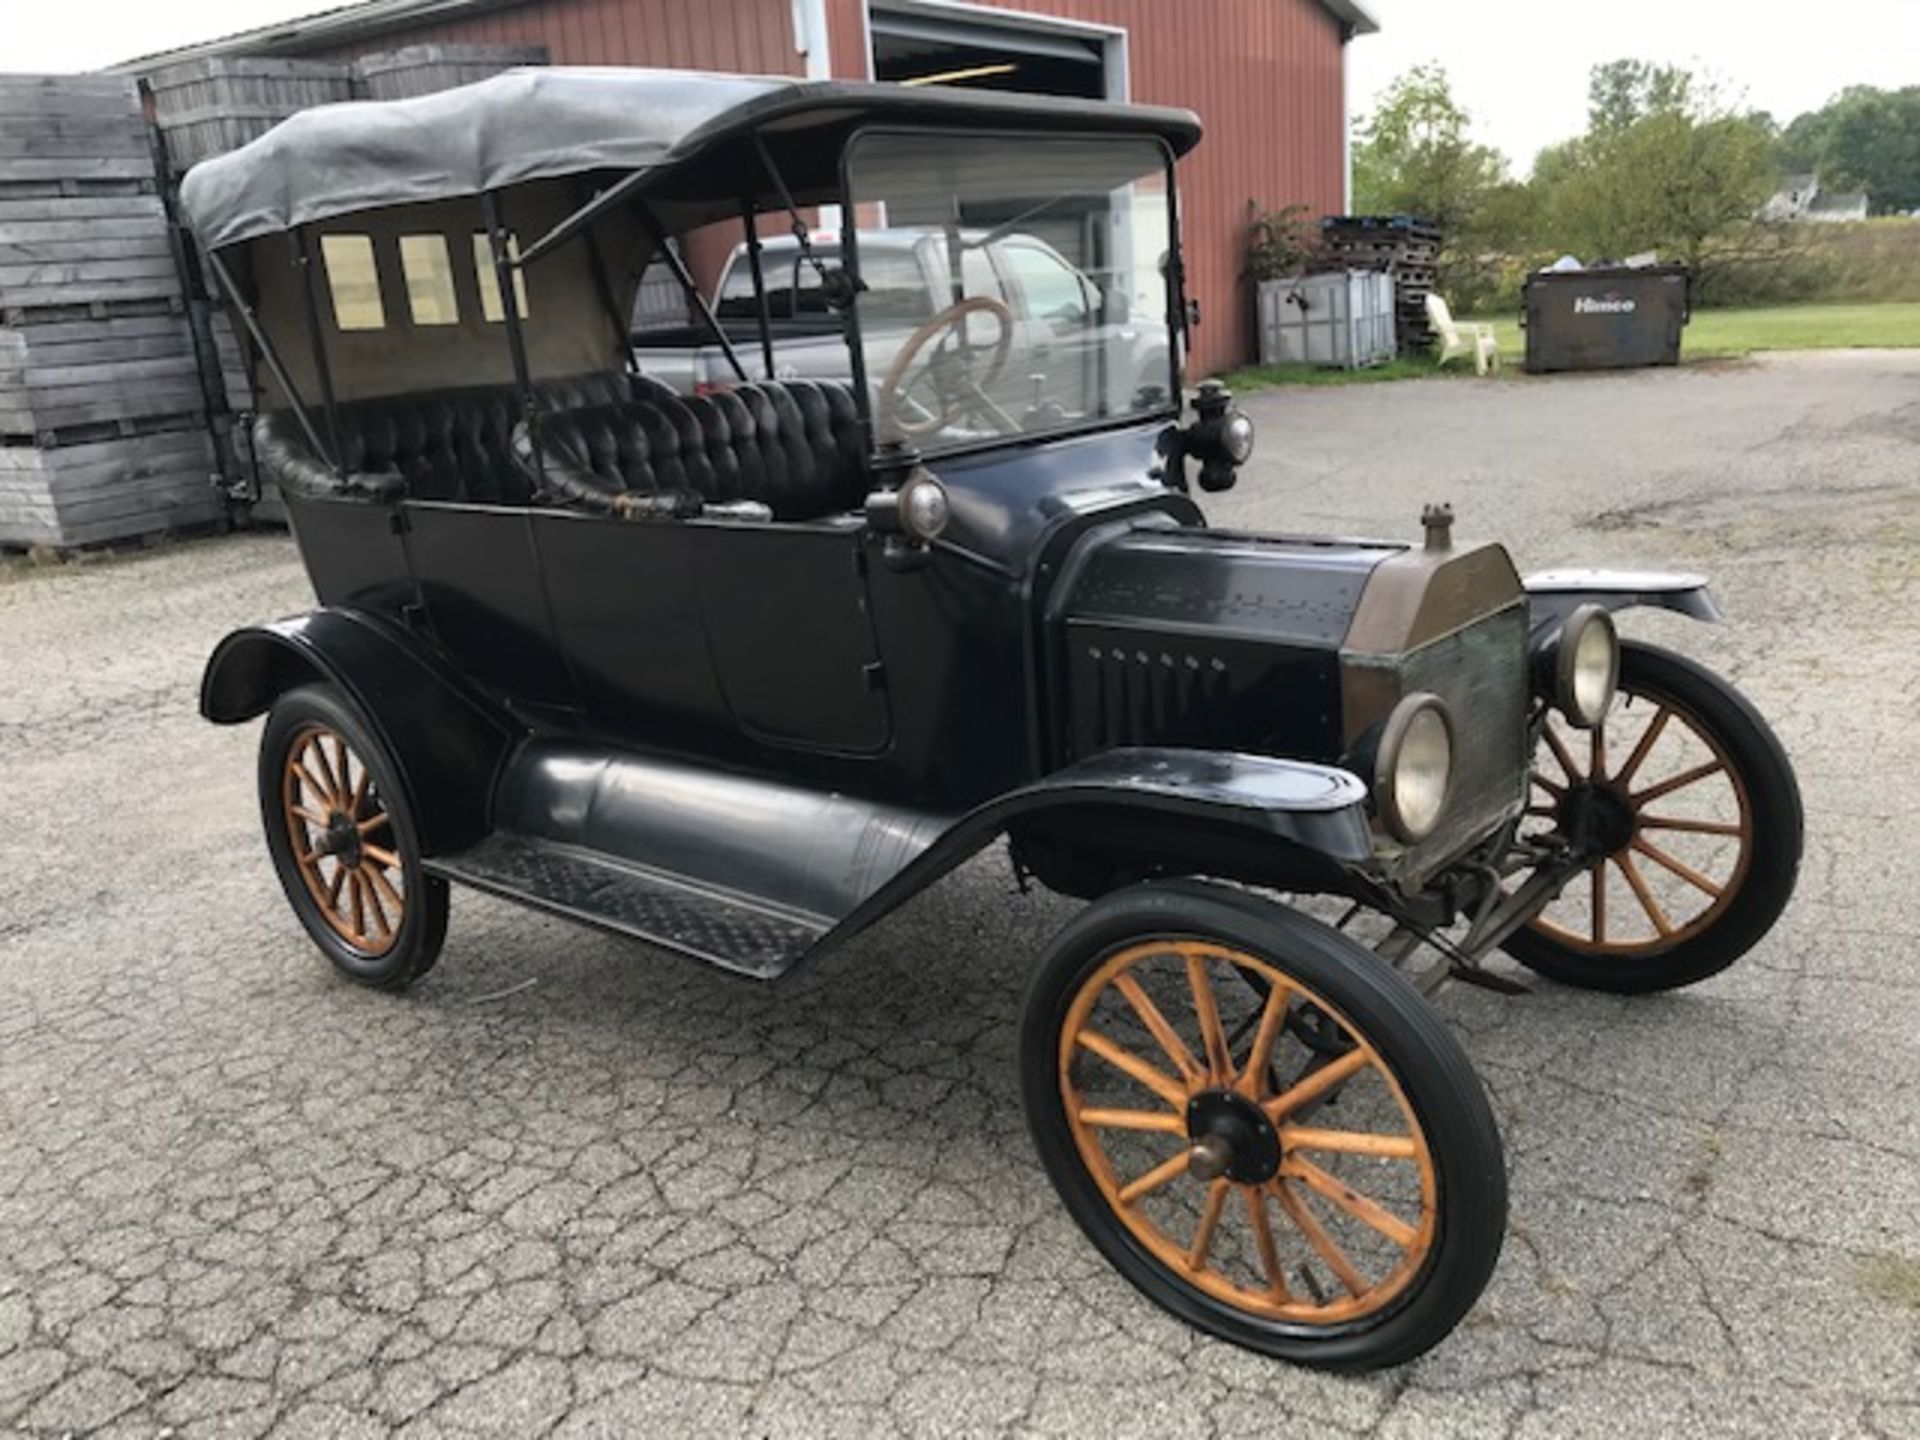 1914 Ford Model T Touring Auto, believed to be original roof and paint, ran approx. 10 years ago